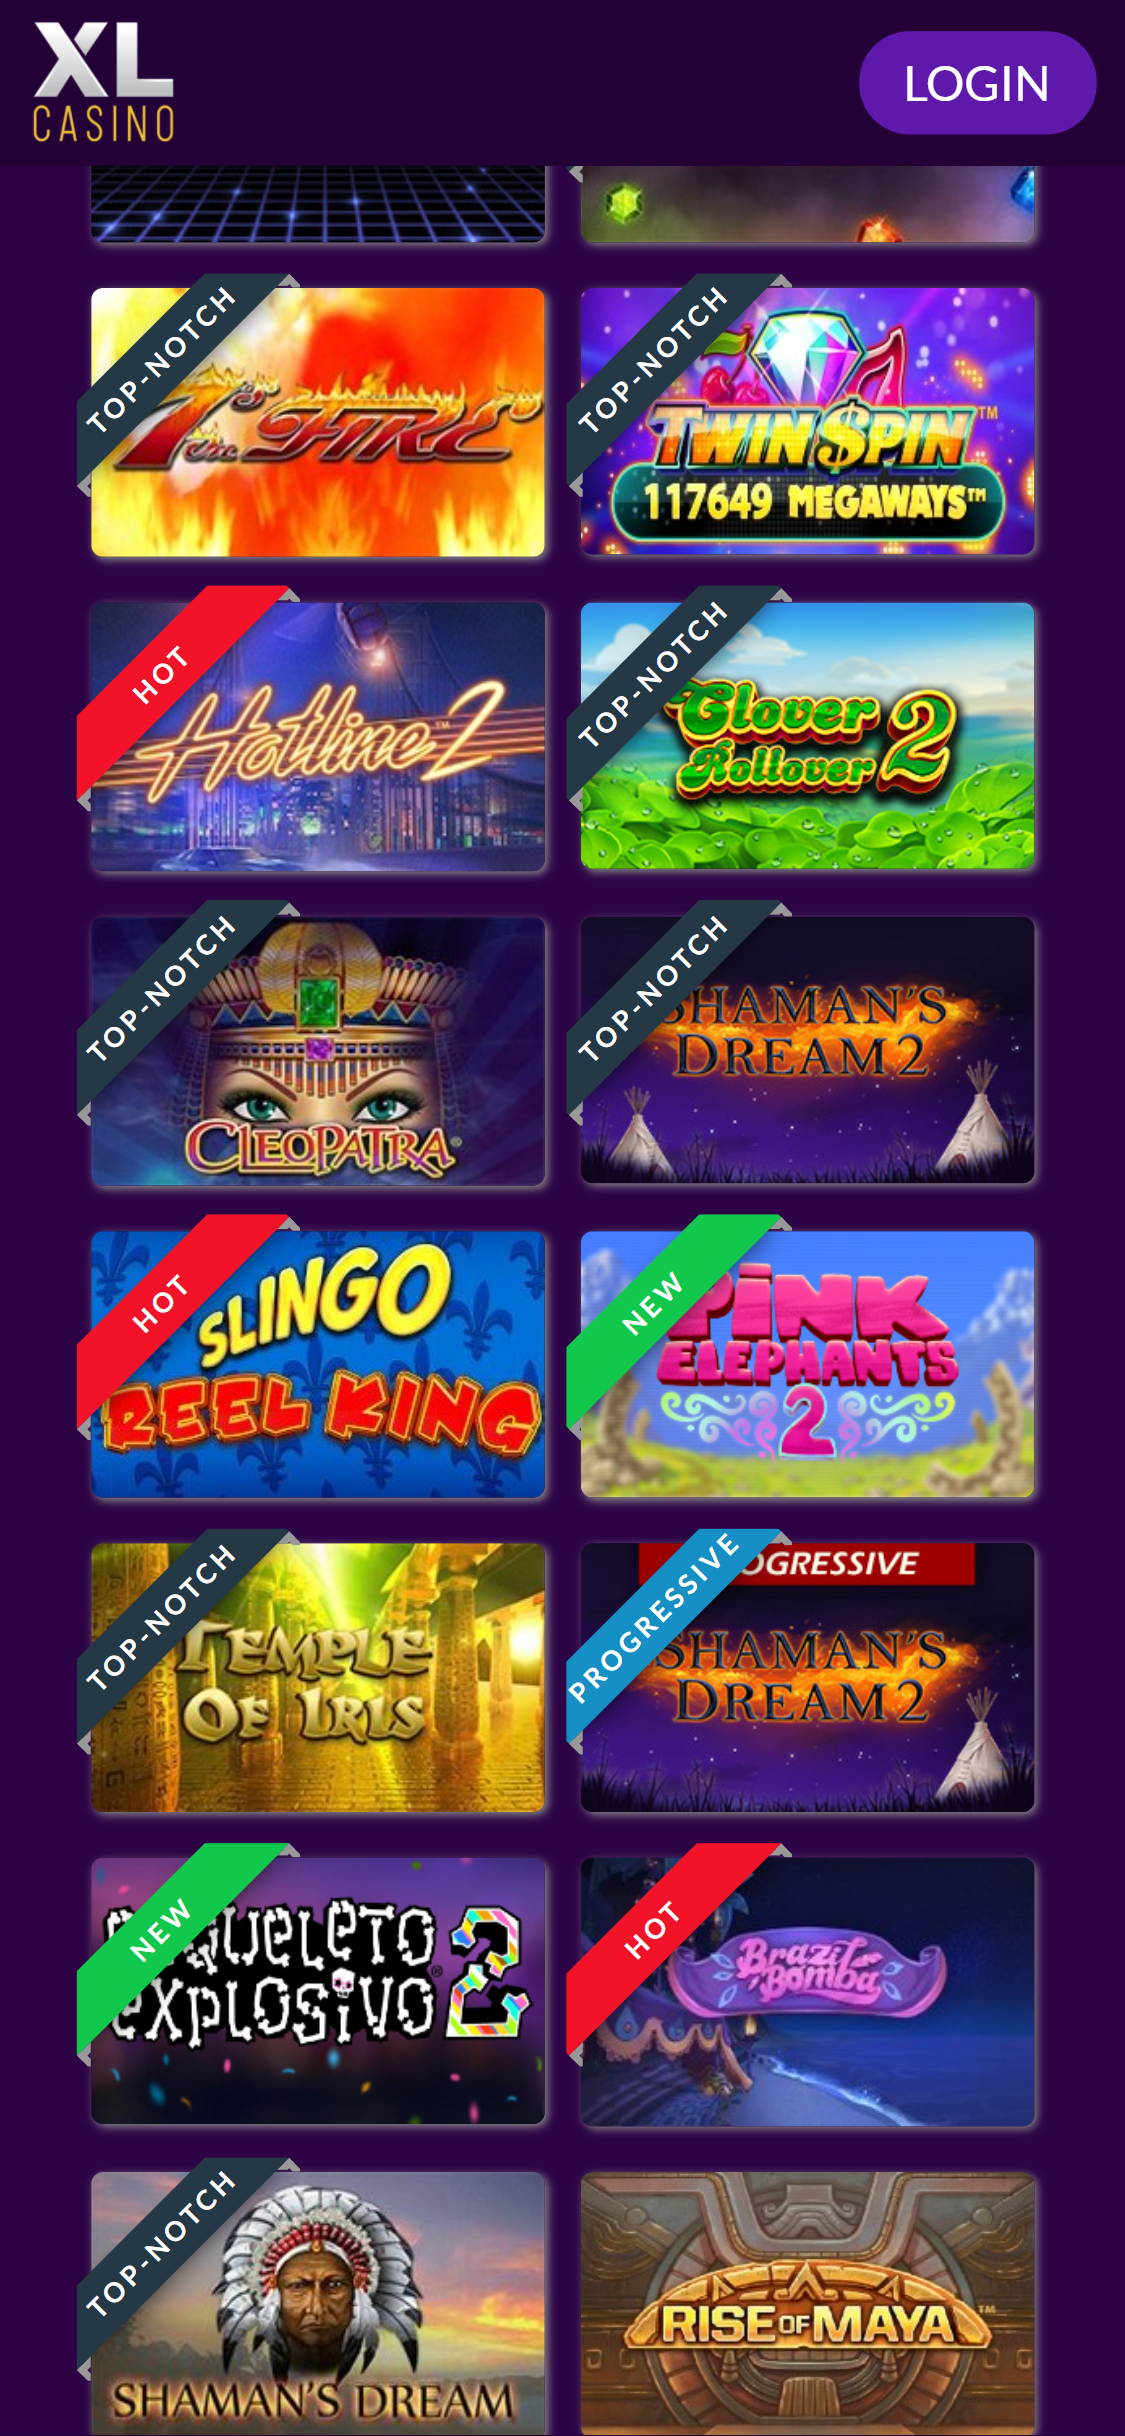 XL Casino Mobile Games Review